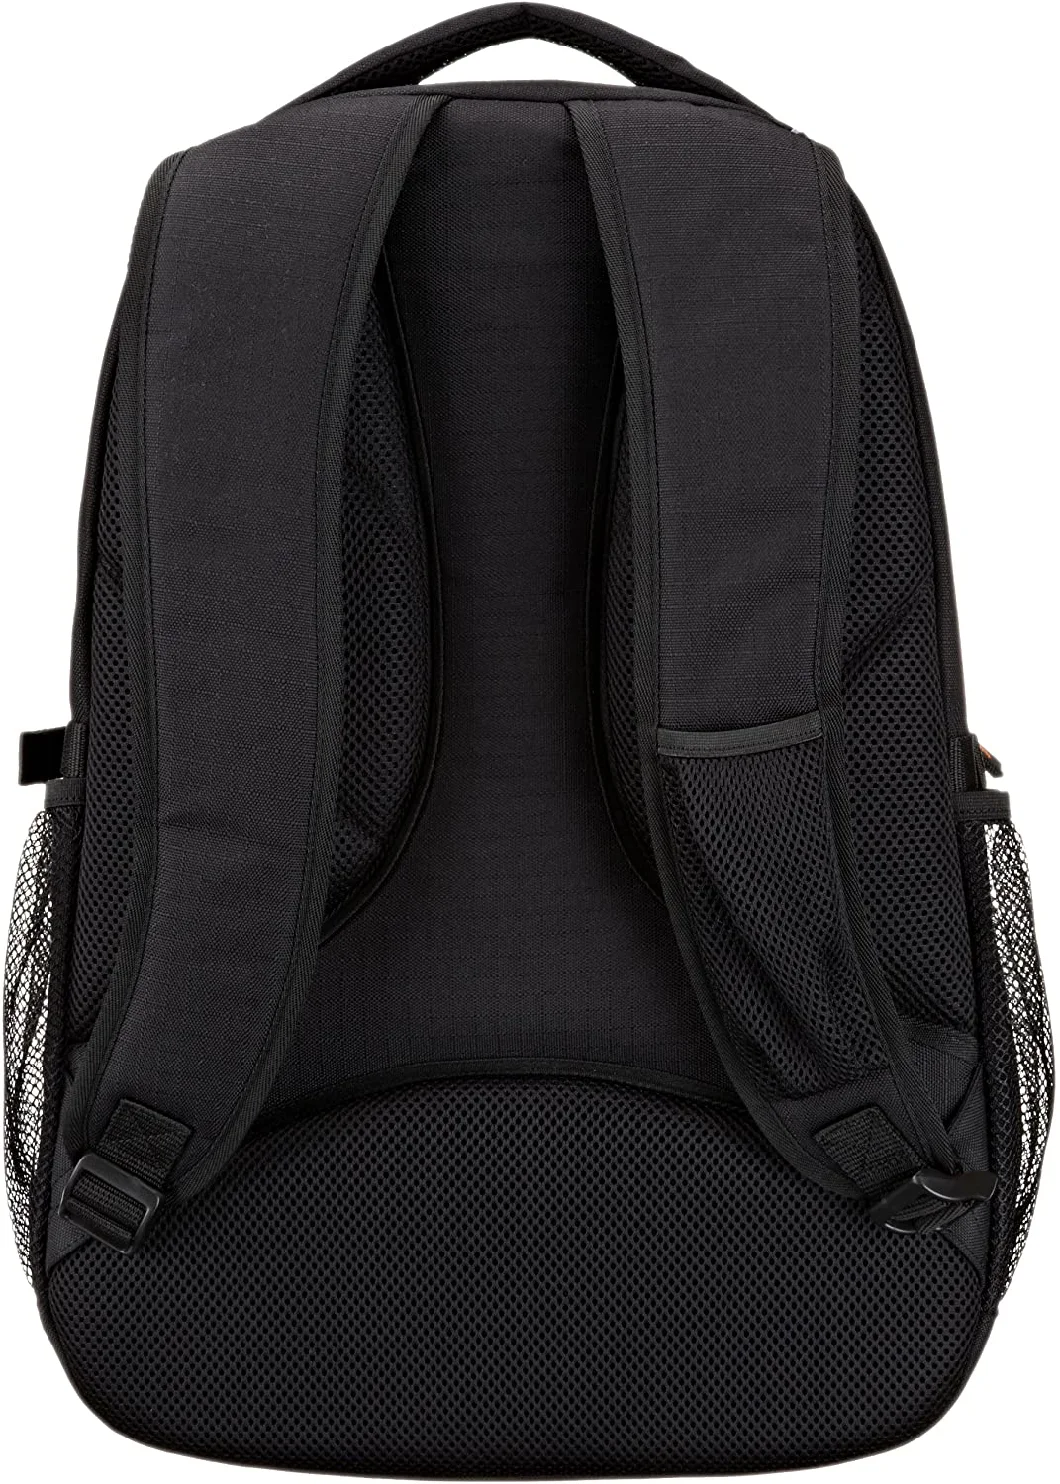 Laptop Backpack Bag - for Maximum 17 Inch Laptop, Used to Ride a Bike, Running, Skiing, Hiking